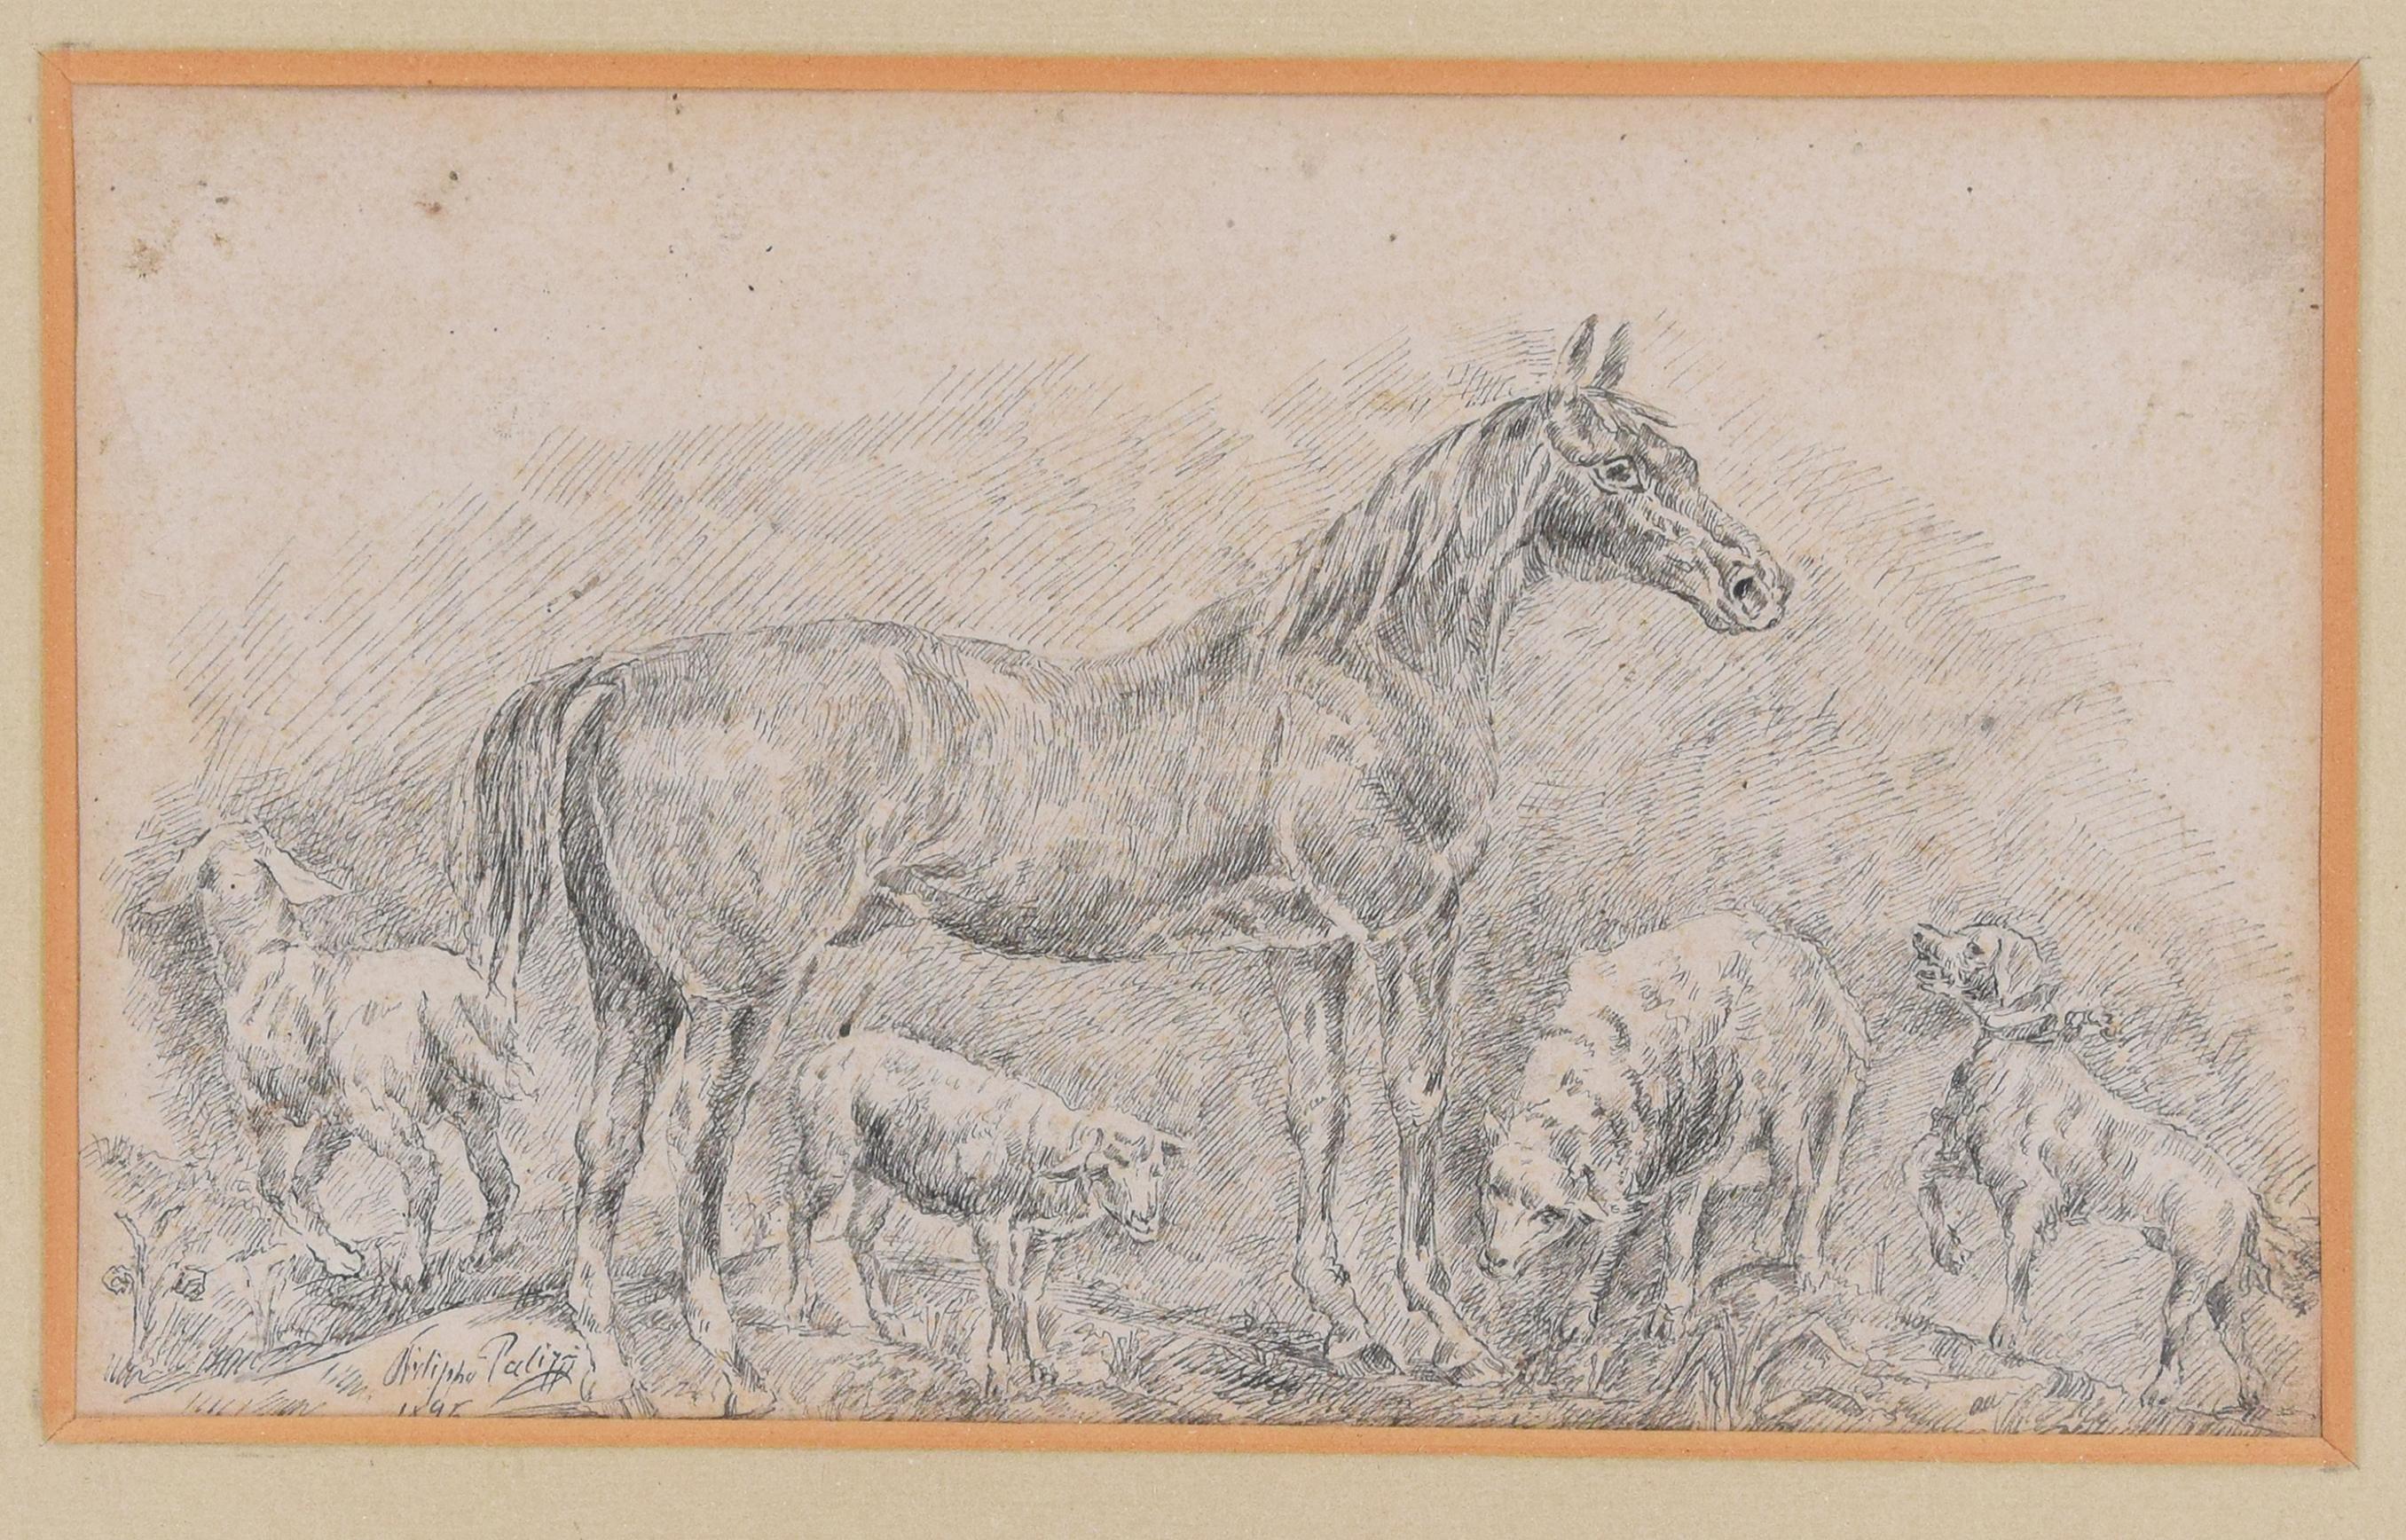 Image dimensions: 14x22 cm.

Horse with Herds is a really beautiful china ink original drawing on paper, signed and dated in black ink on lower margin by the Italian artist, Filippo Palizzi (1818-1899).

The freshness of the line, and the